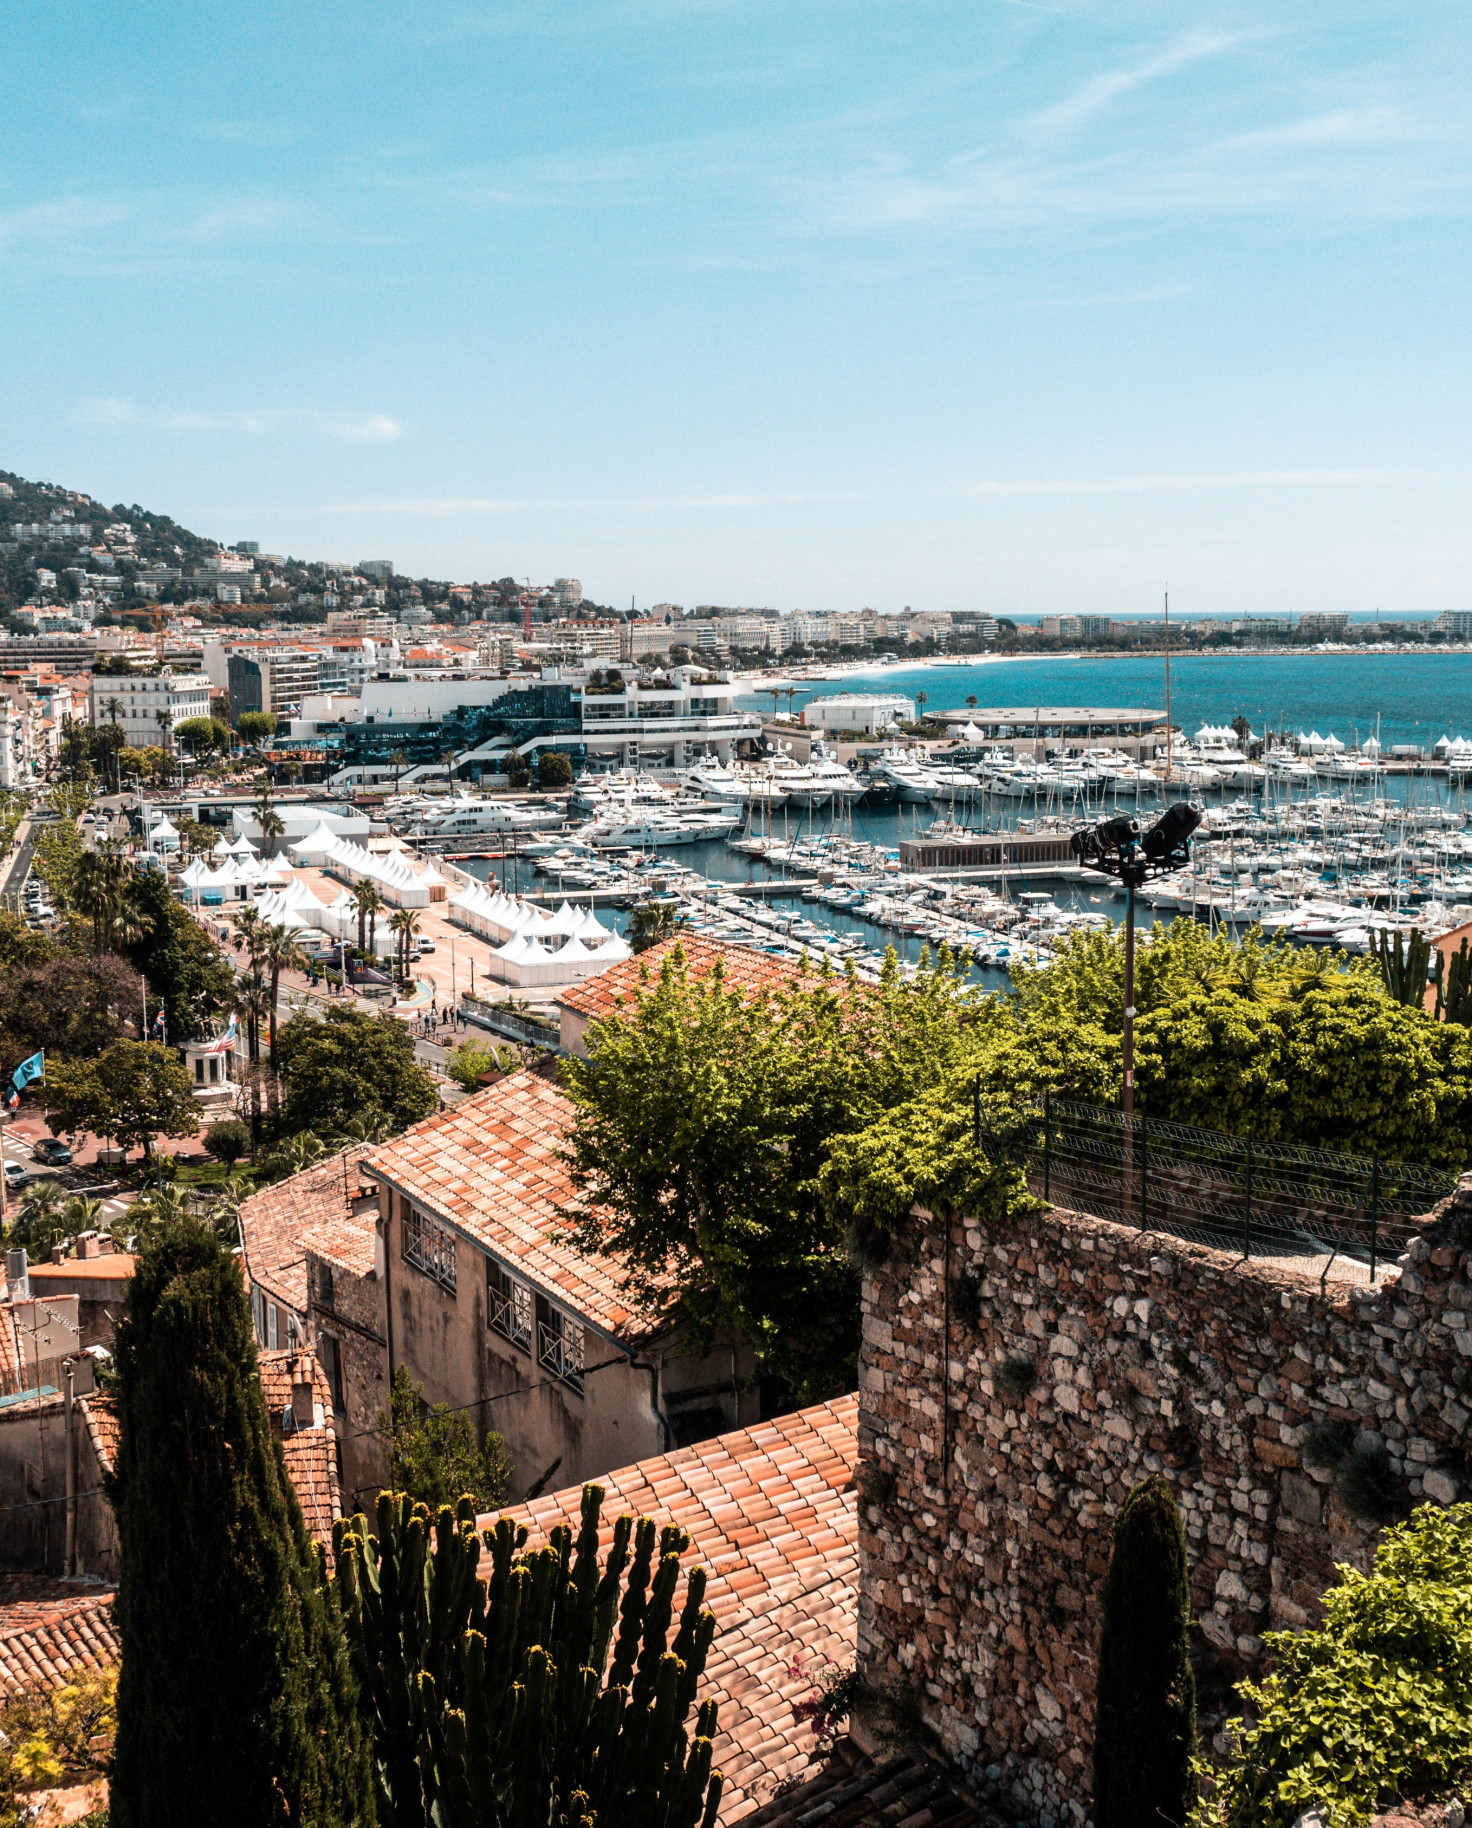 Cannes in the French Riviera